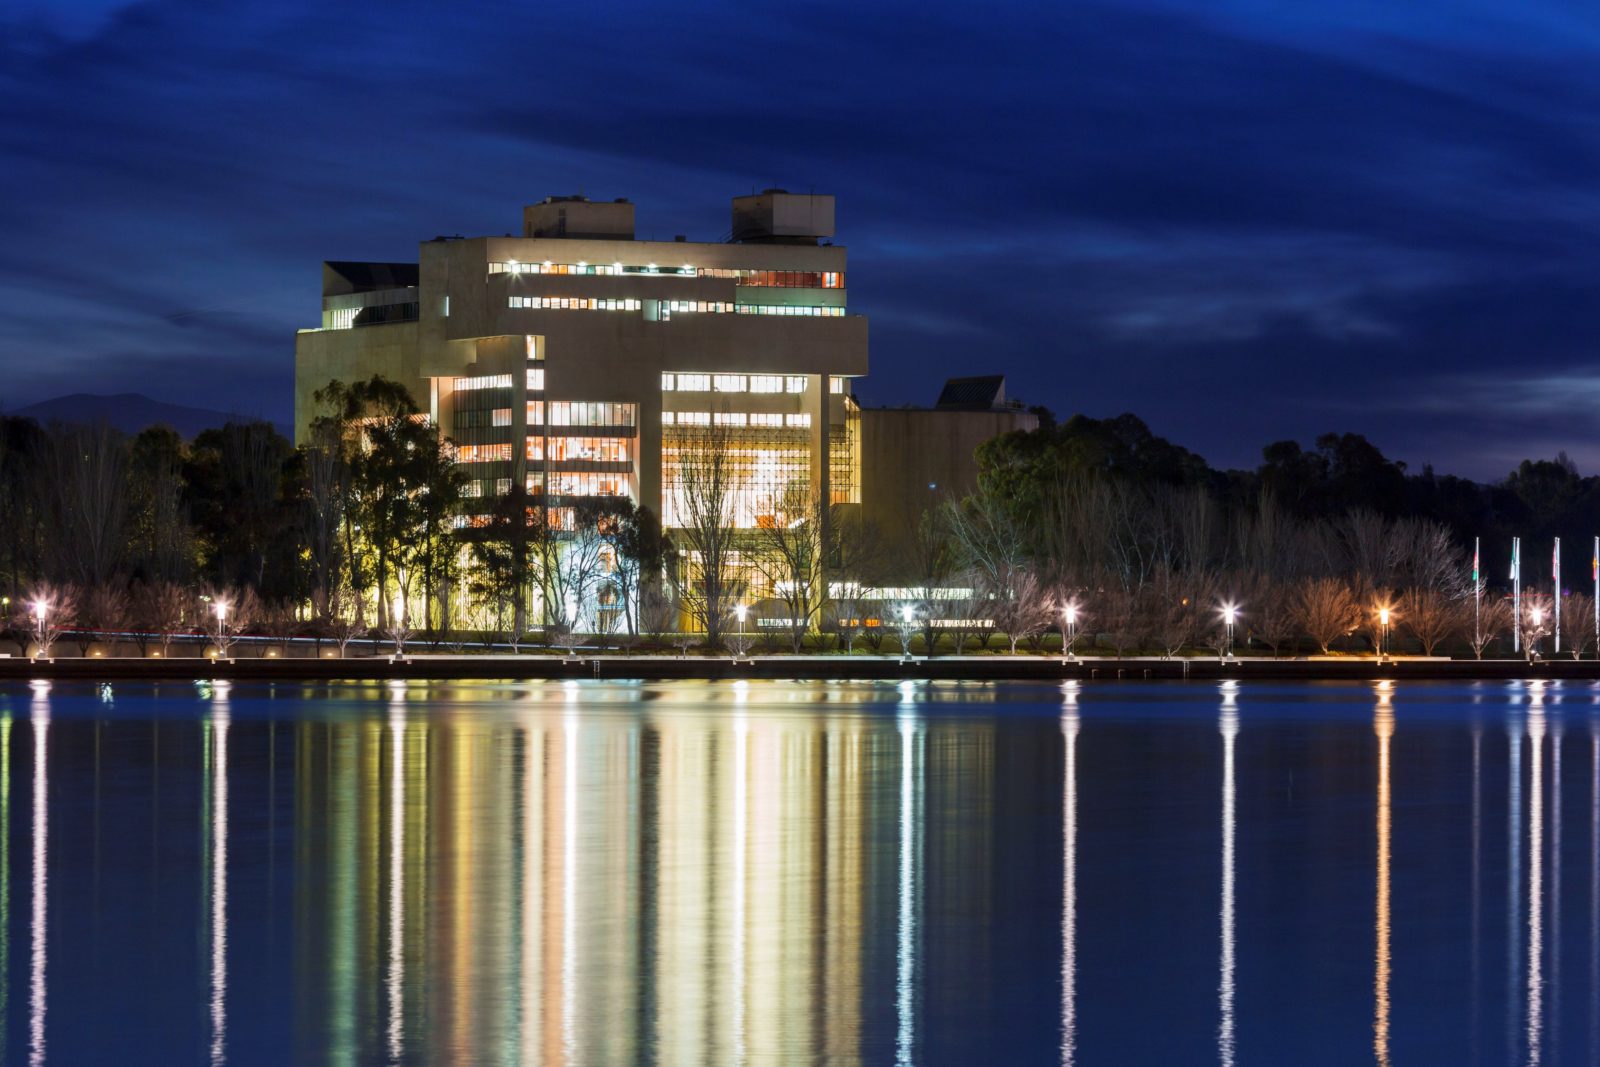 High Court of Australia at night from across Lake Burley Griffin